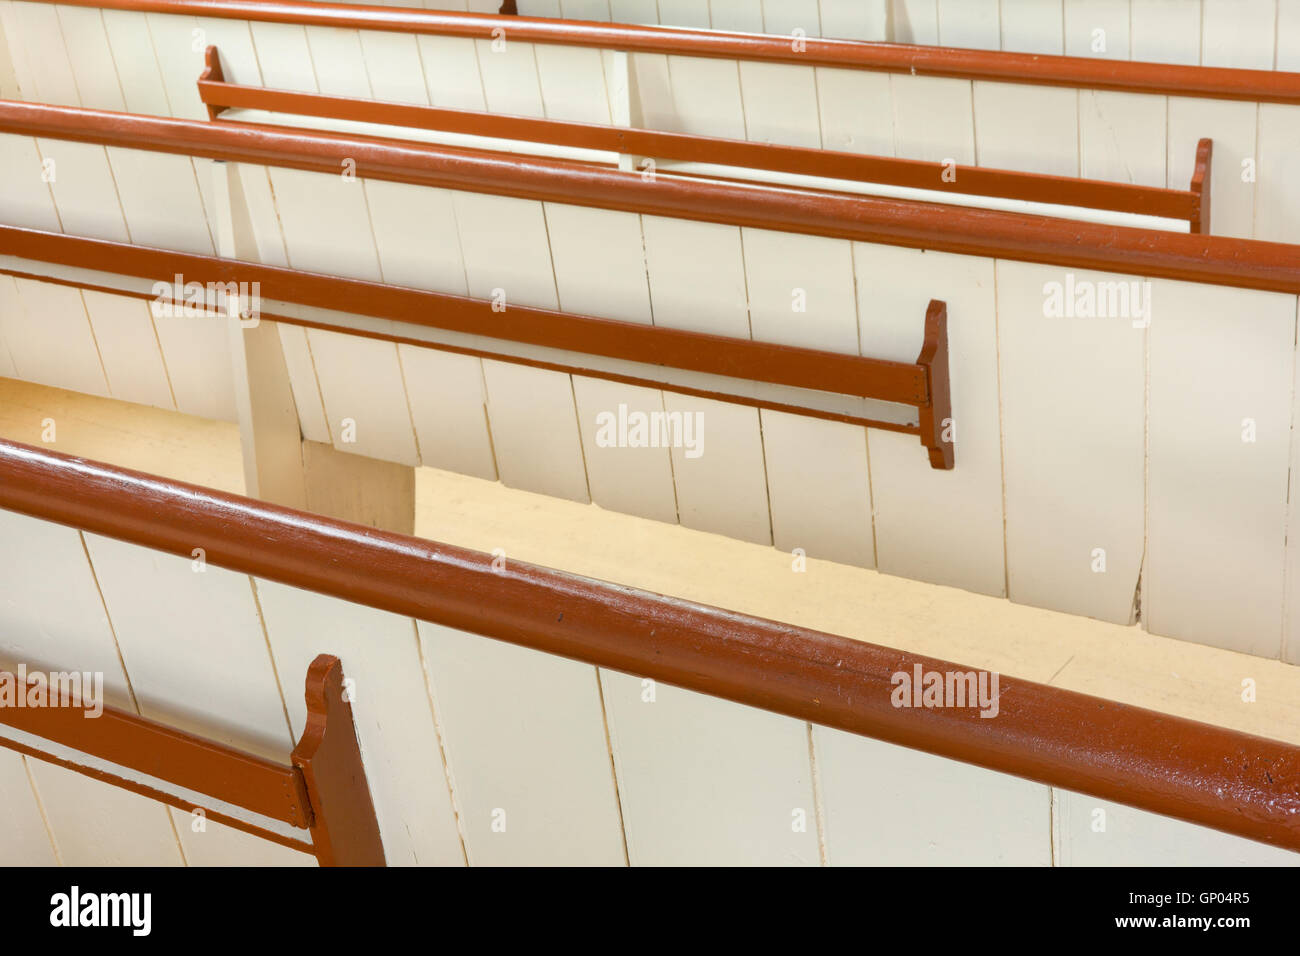 Detail view from behind of wooden church pews. Stock Photo